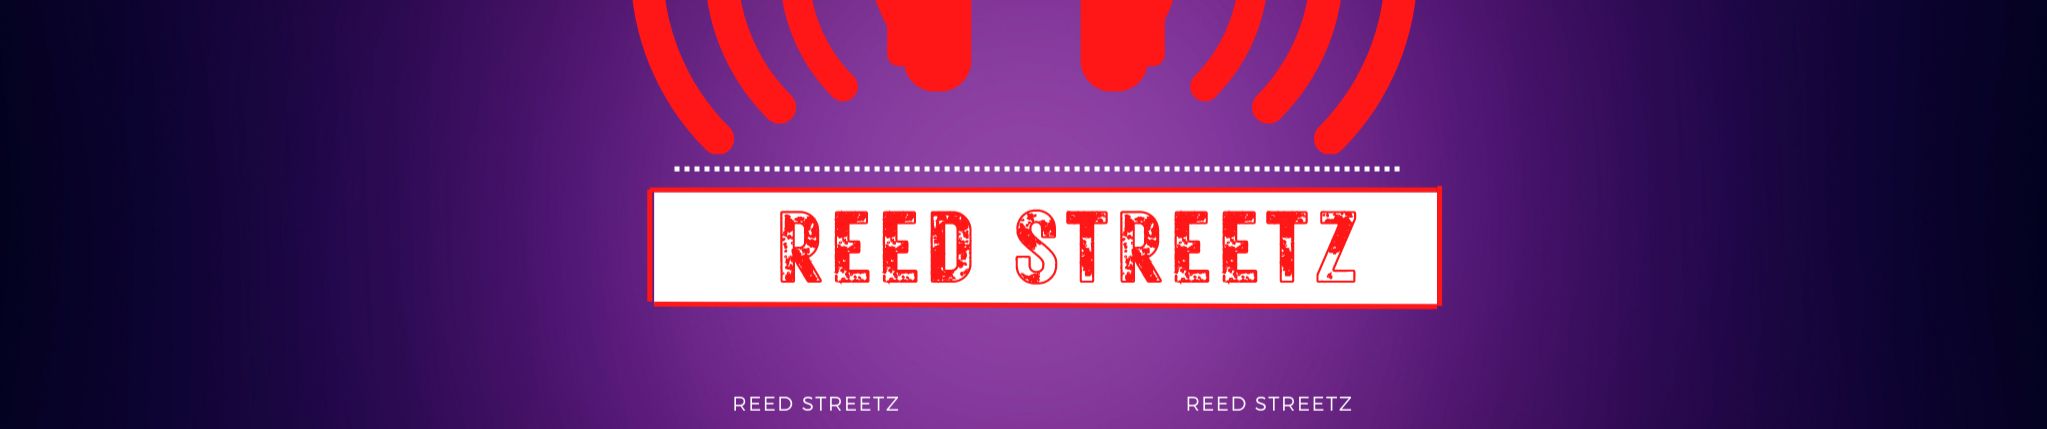 Stream Reed Streetz FBS music Listen to songs, albums, playlists for free on SoundCloud